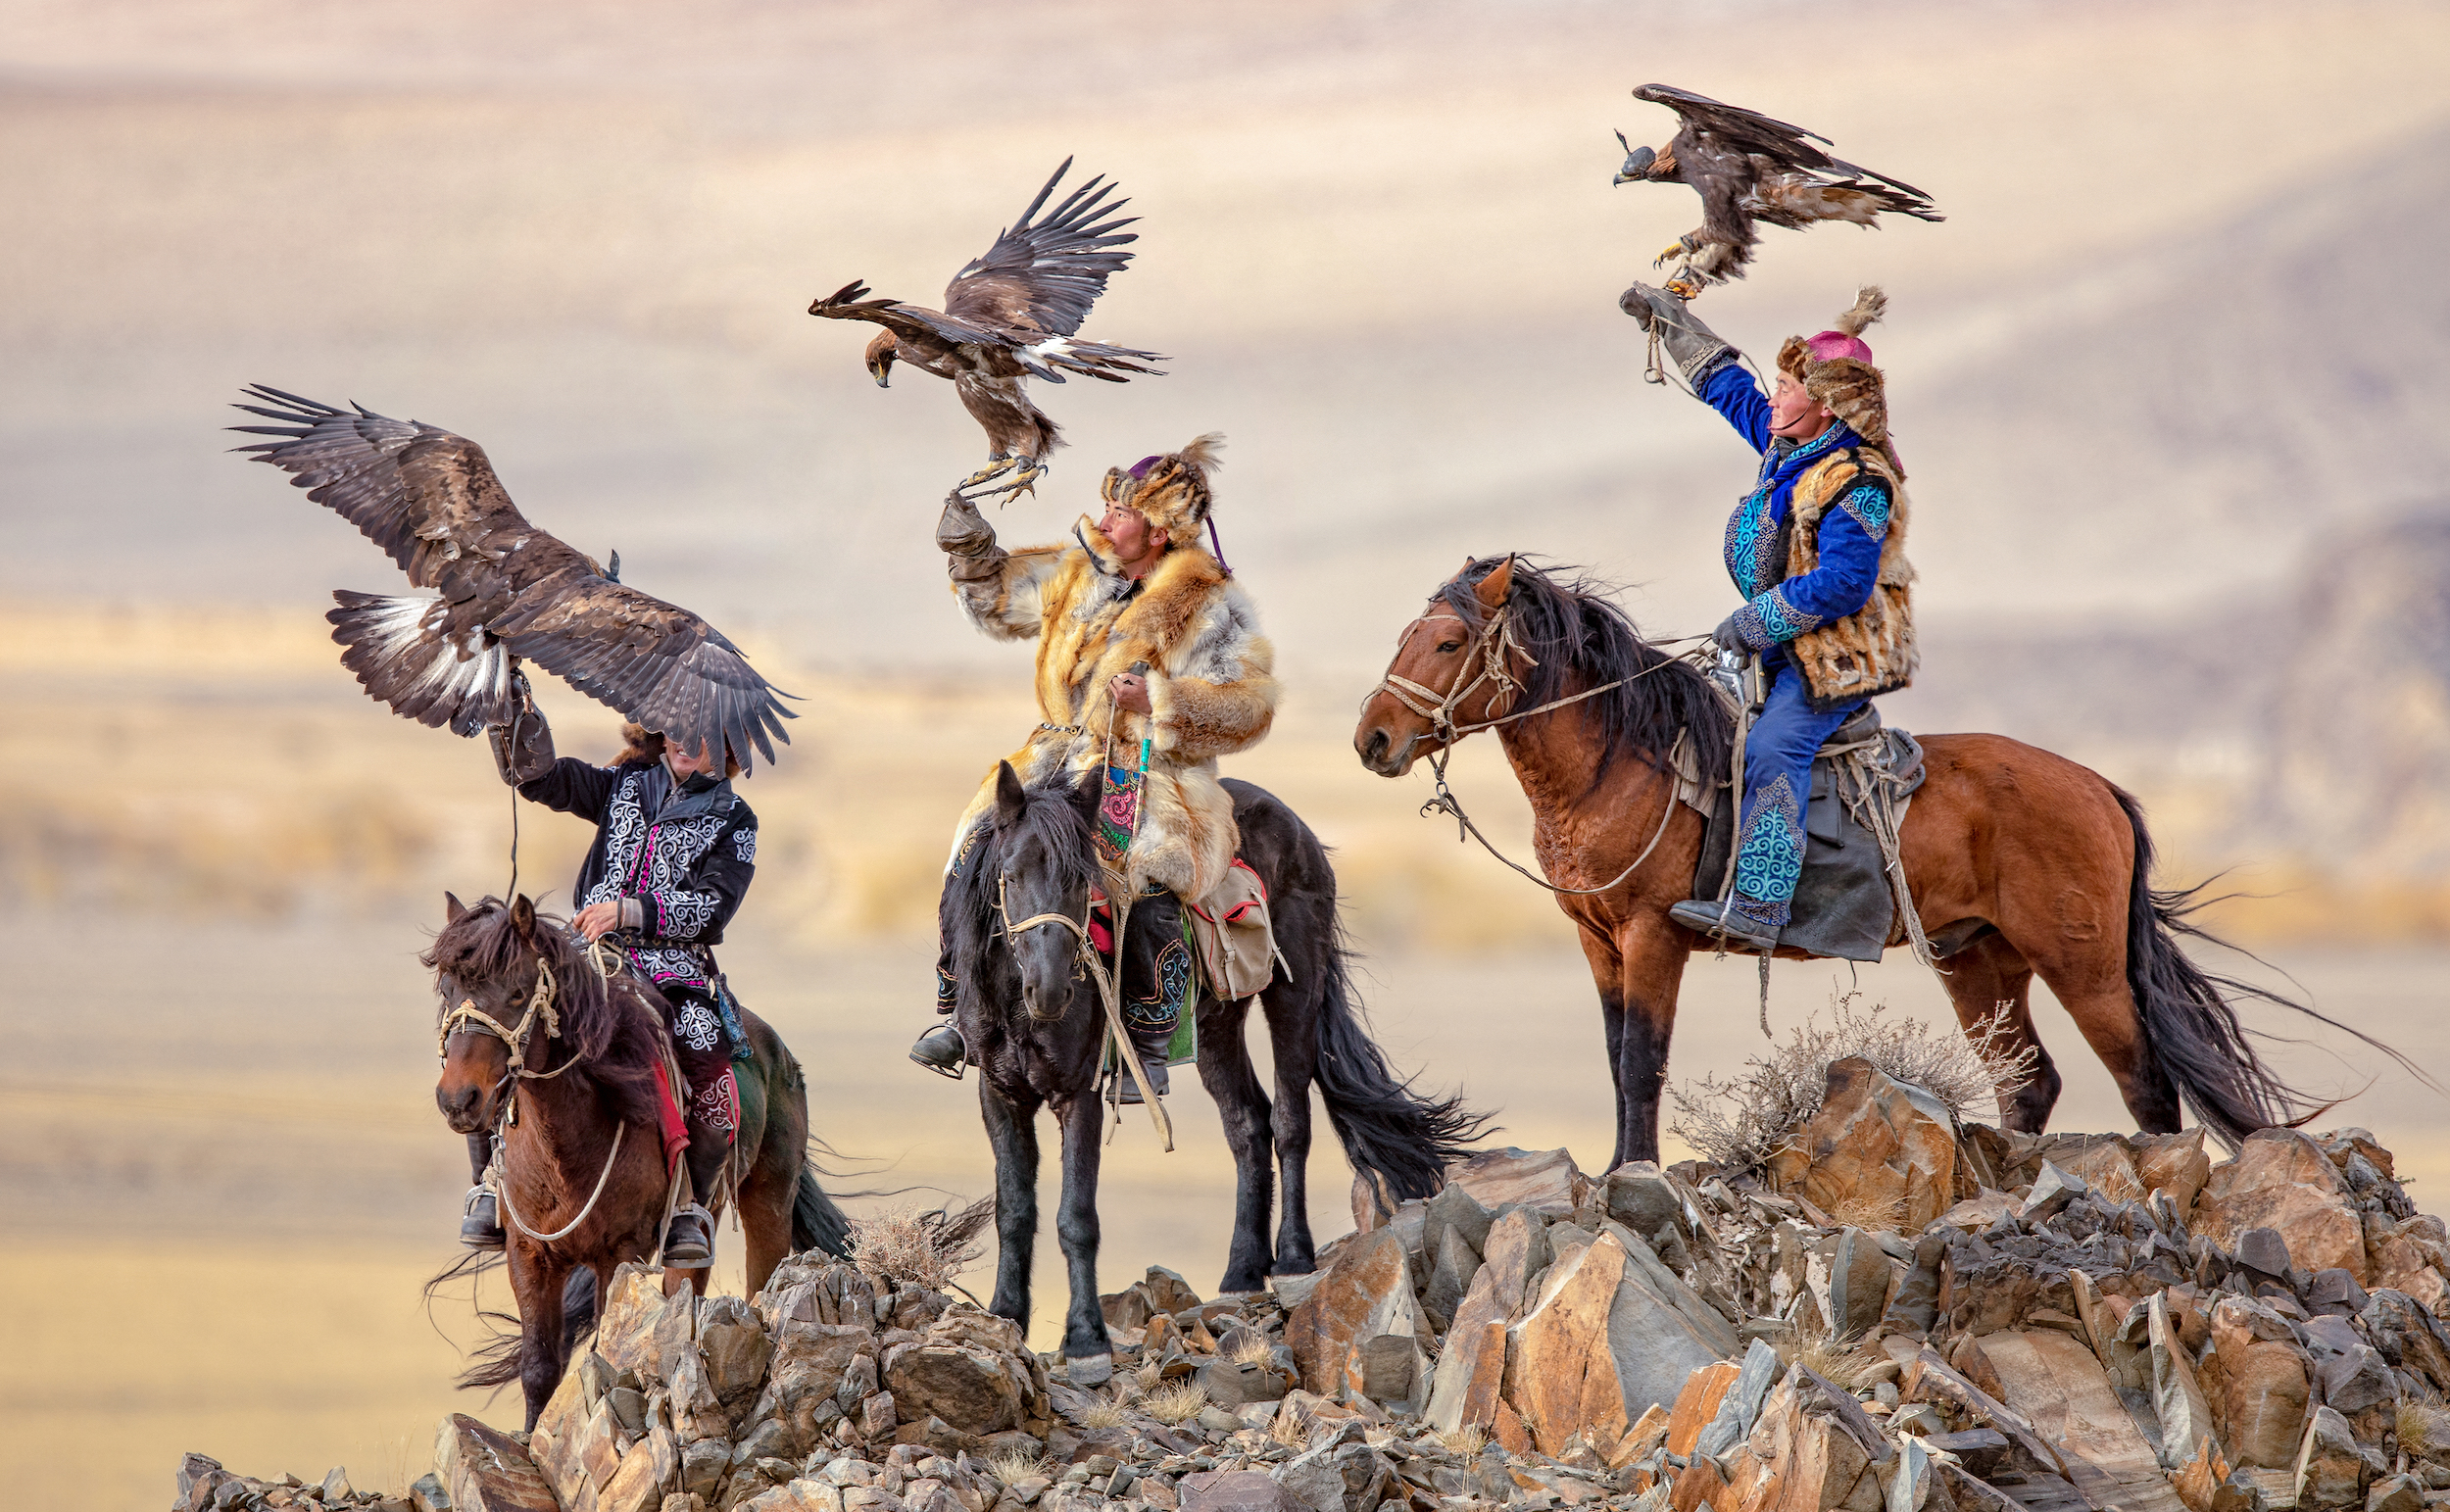 Mongolian nomads hunting with golden eagles and horses